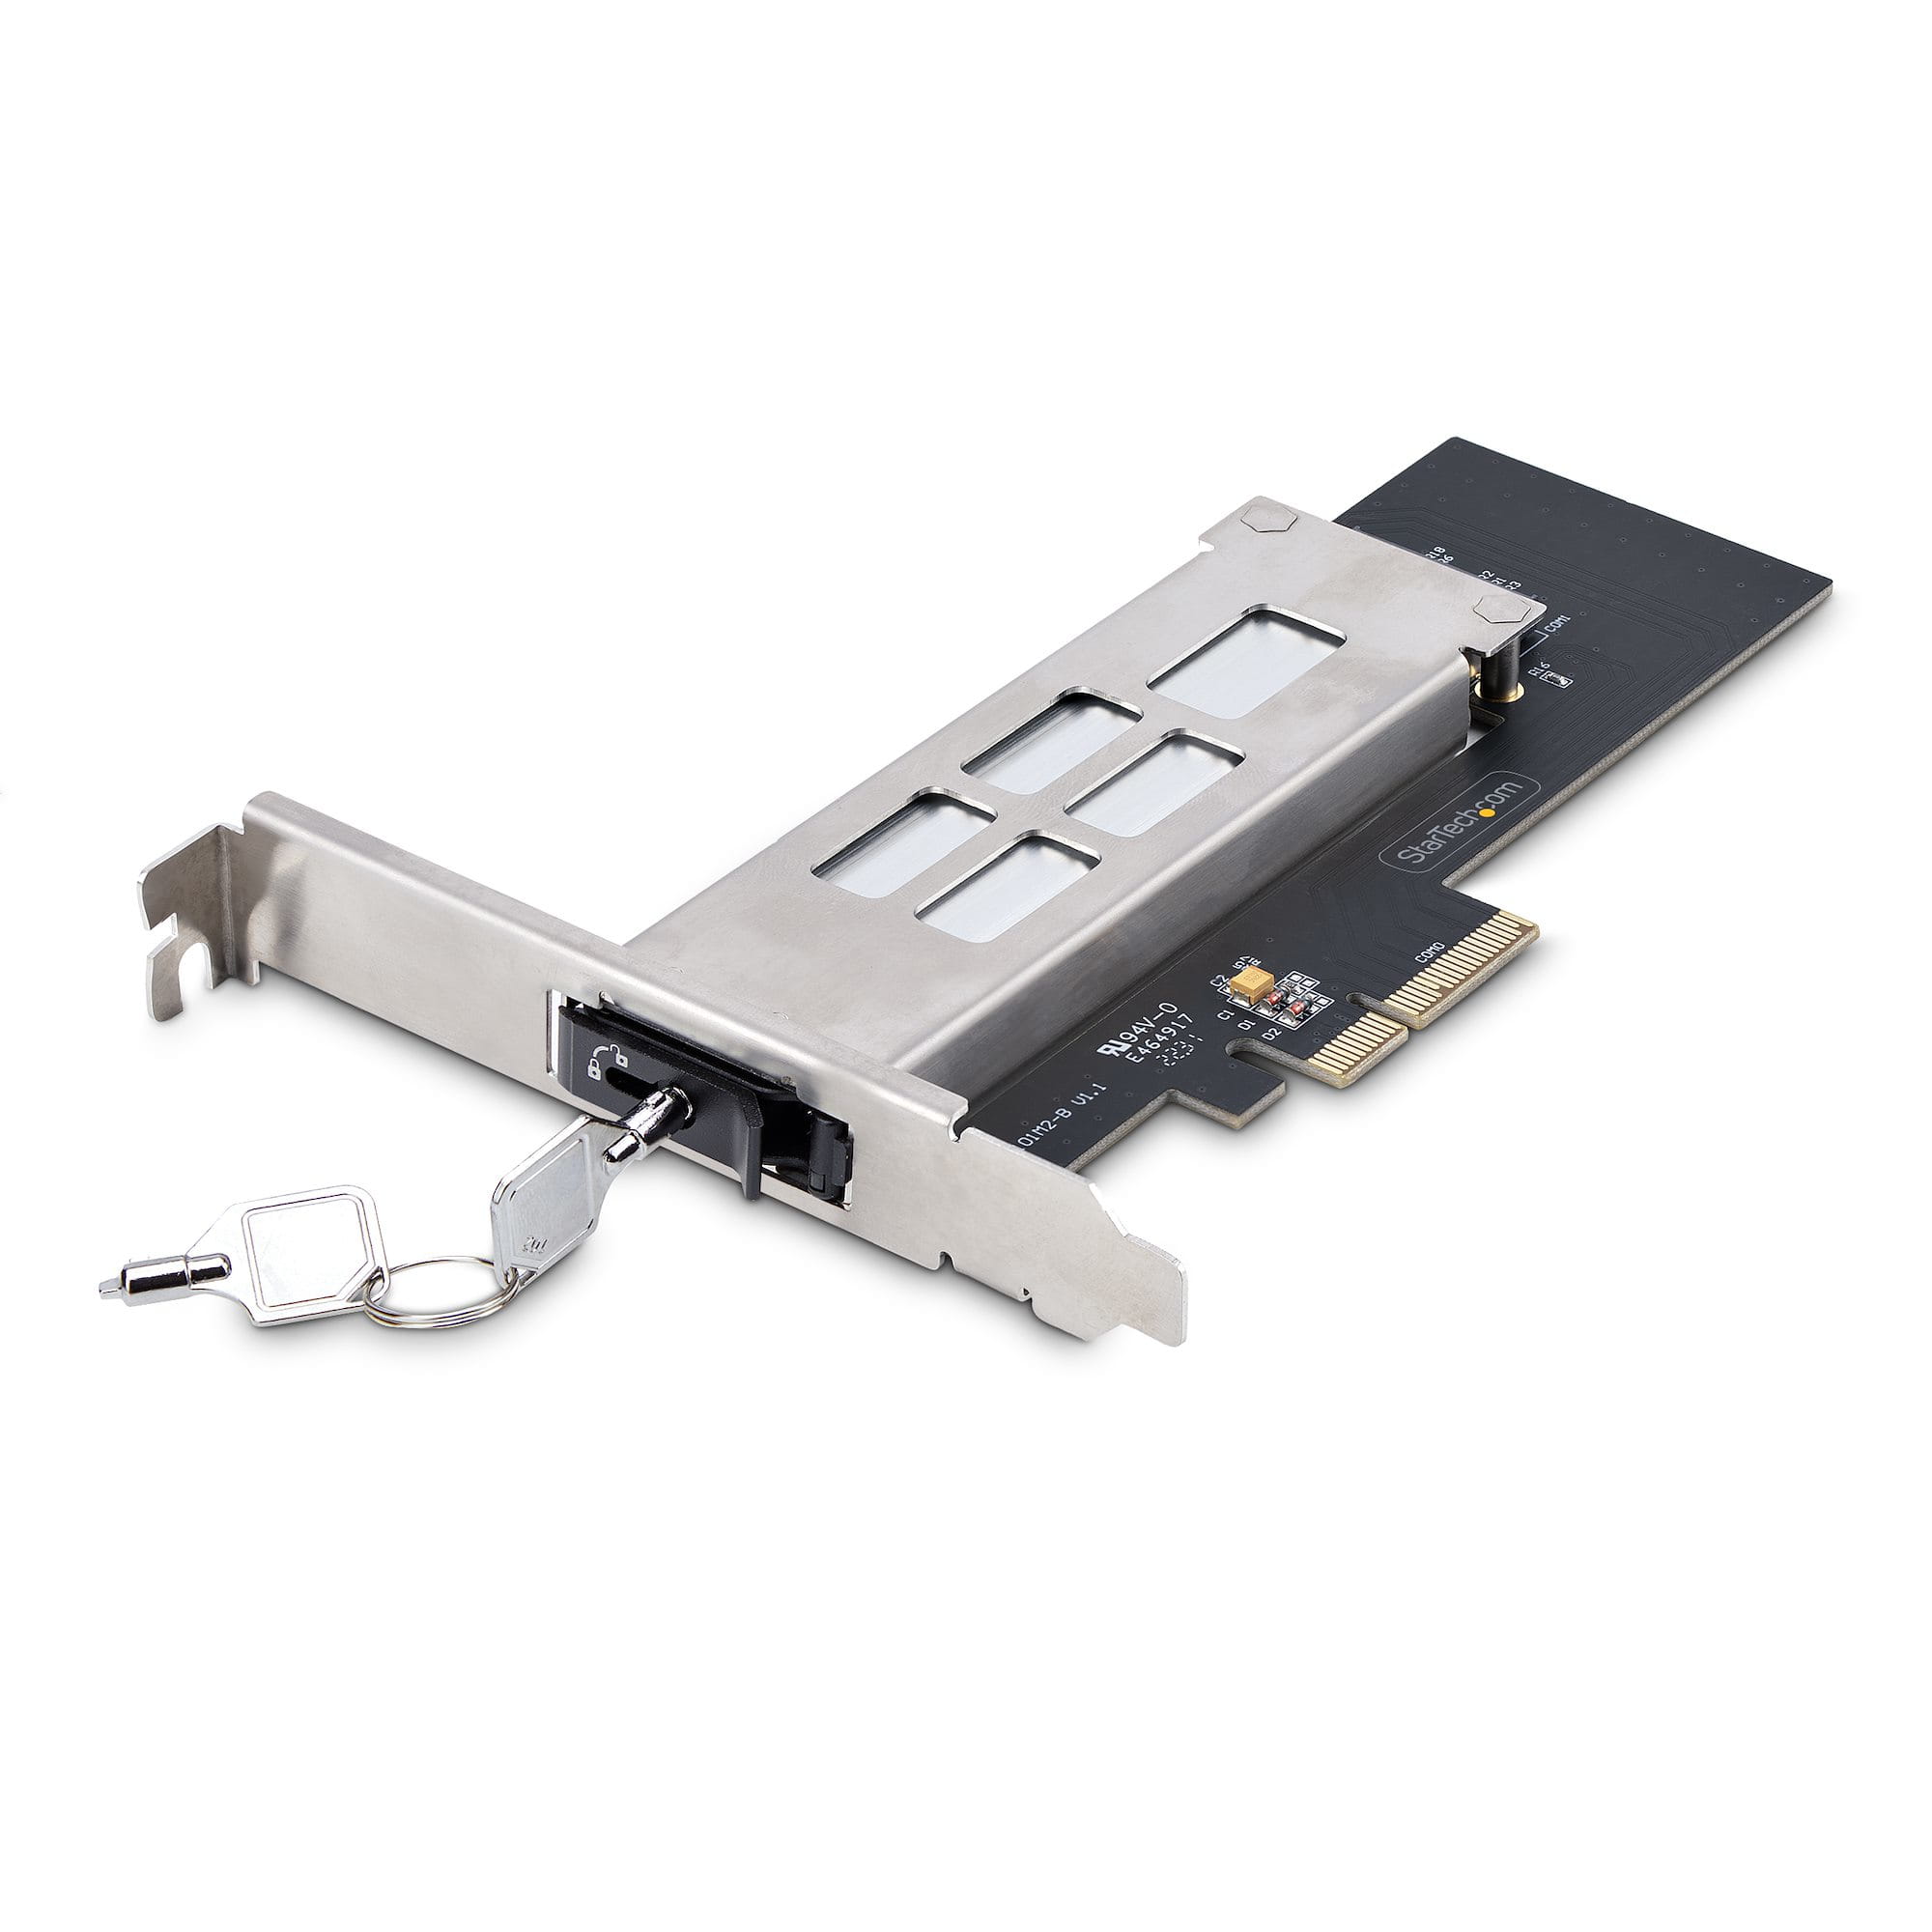 StarTech.com M.2 NVMe SSD to PCIe x4 Mobile Rack/Backplane with Removable Tray for PCI Express Expansion Slot, Tool-less Installation, PCIe 4.0/3.0 Hot-Swap Drive Bay, Key Lock - 2 Keys Included - Schnittstellenadapter - M.2 - M.2 NVMe Card / PCIe 4.0 (N